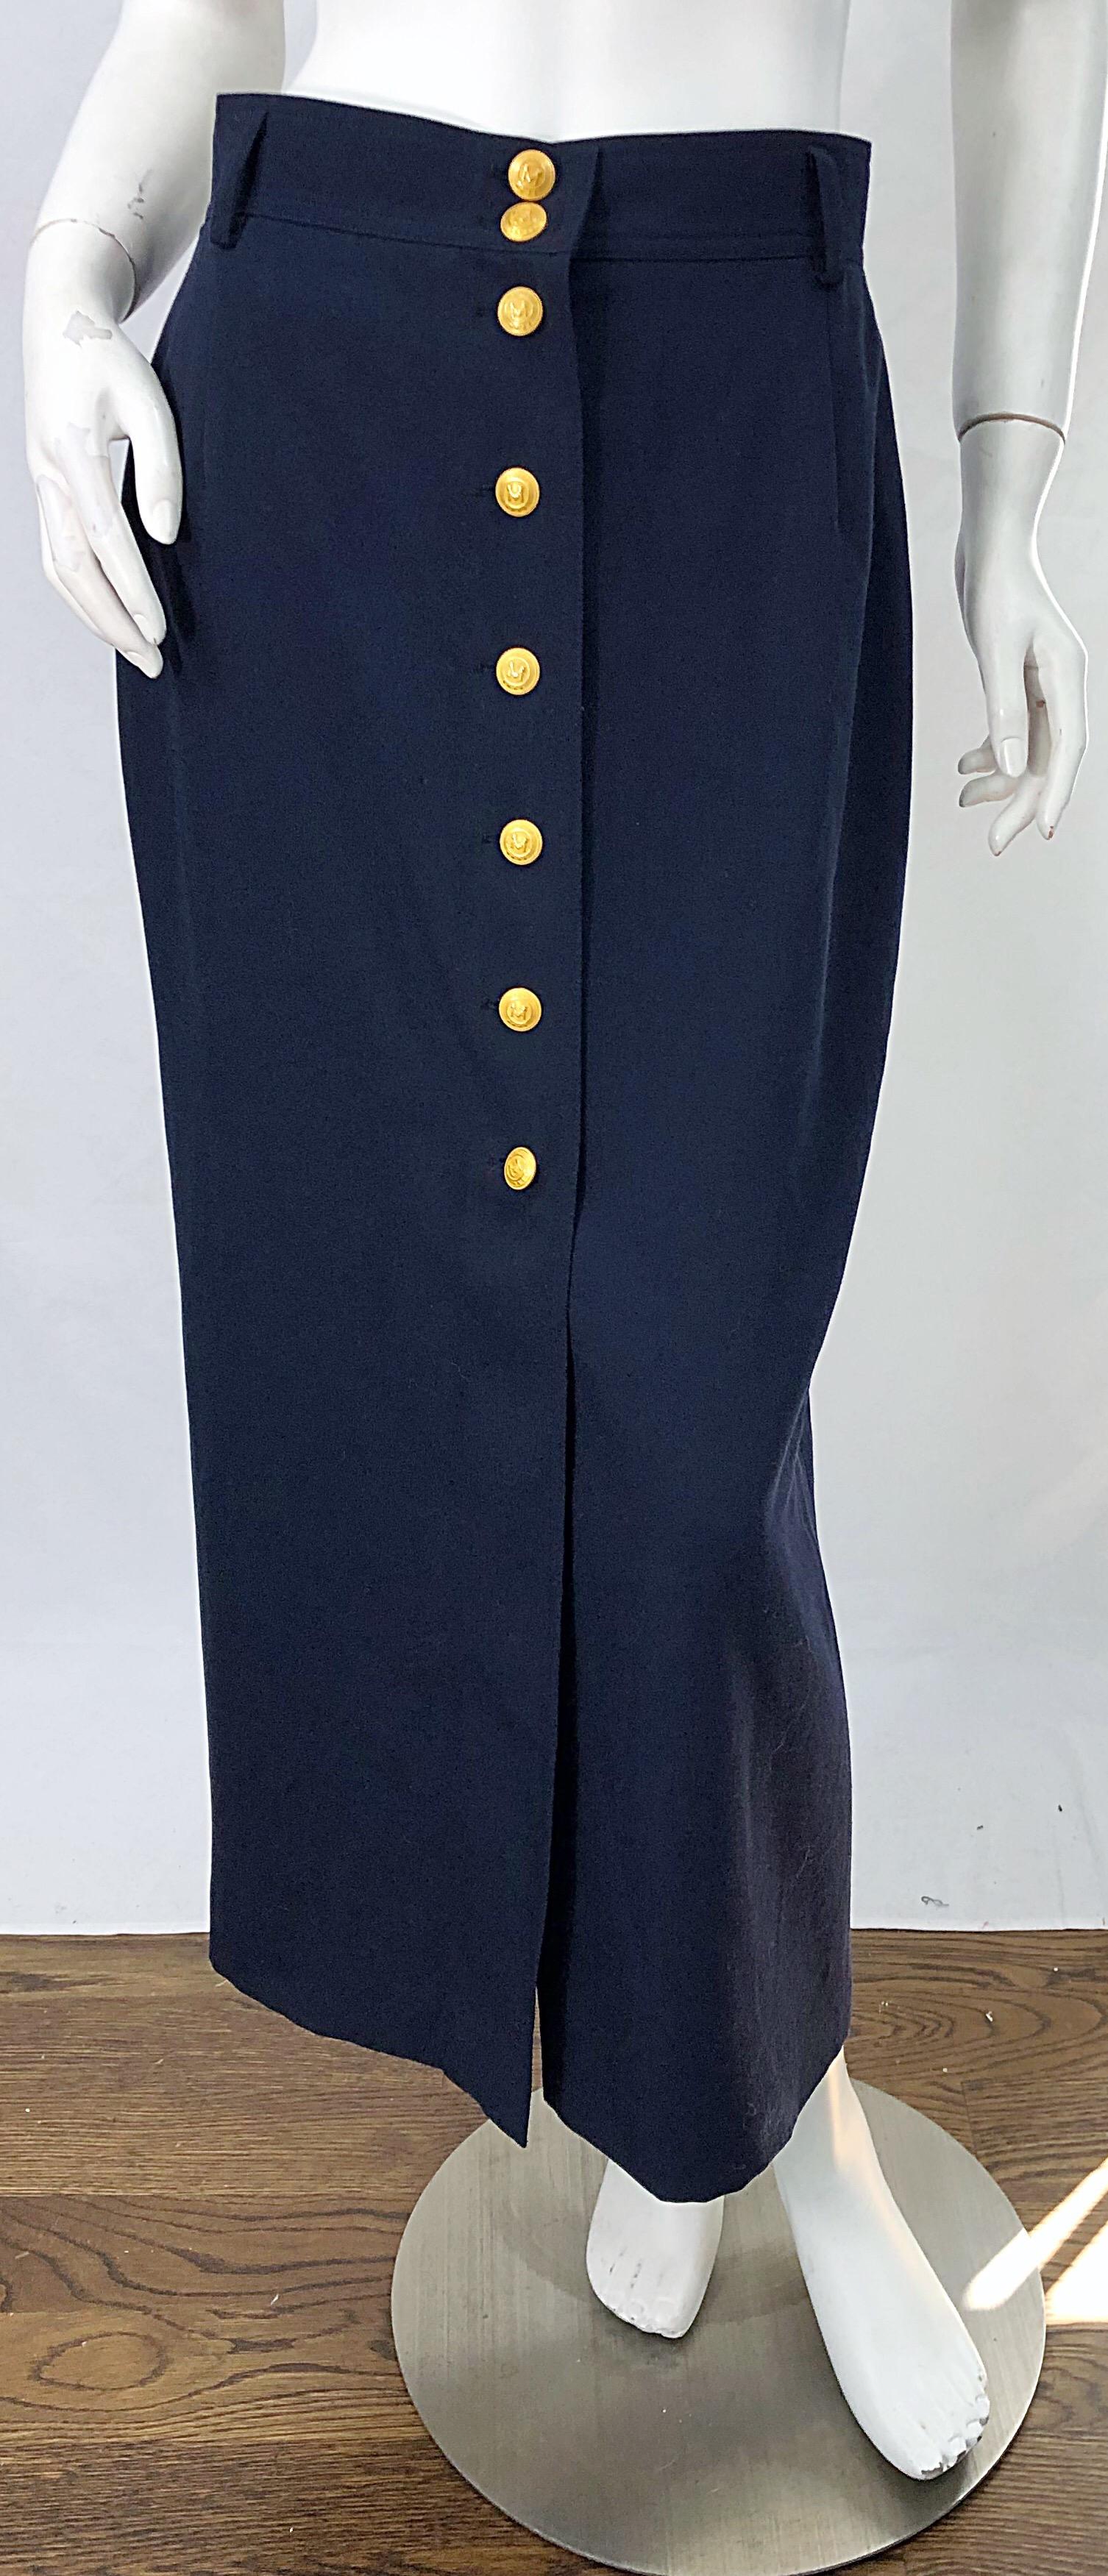 Chic 1990s MONDI navy blue midi skirt ! Features a lightweight wool blend. Gold logo embossed buttons up the front. Fully lined. Can easily be dressed up or down. The perfect midi length can go from day to evening. 
In great condition
Made in